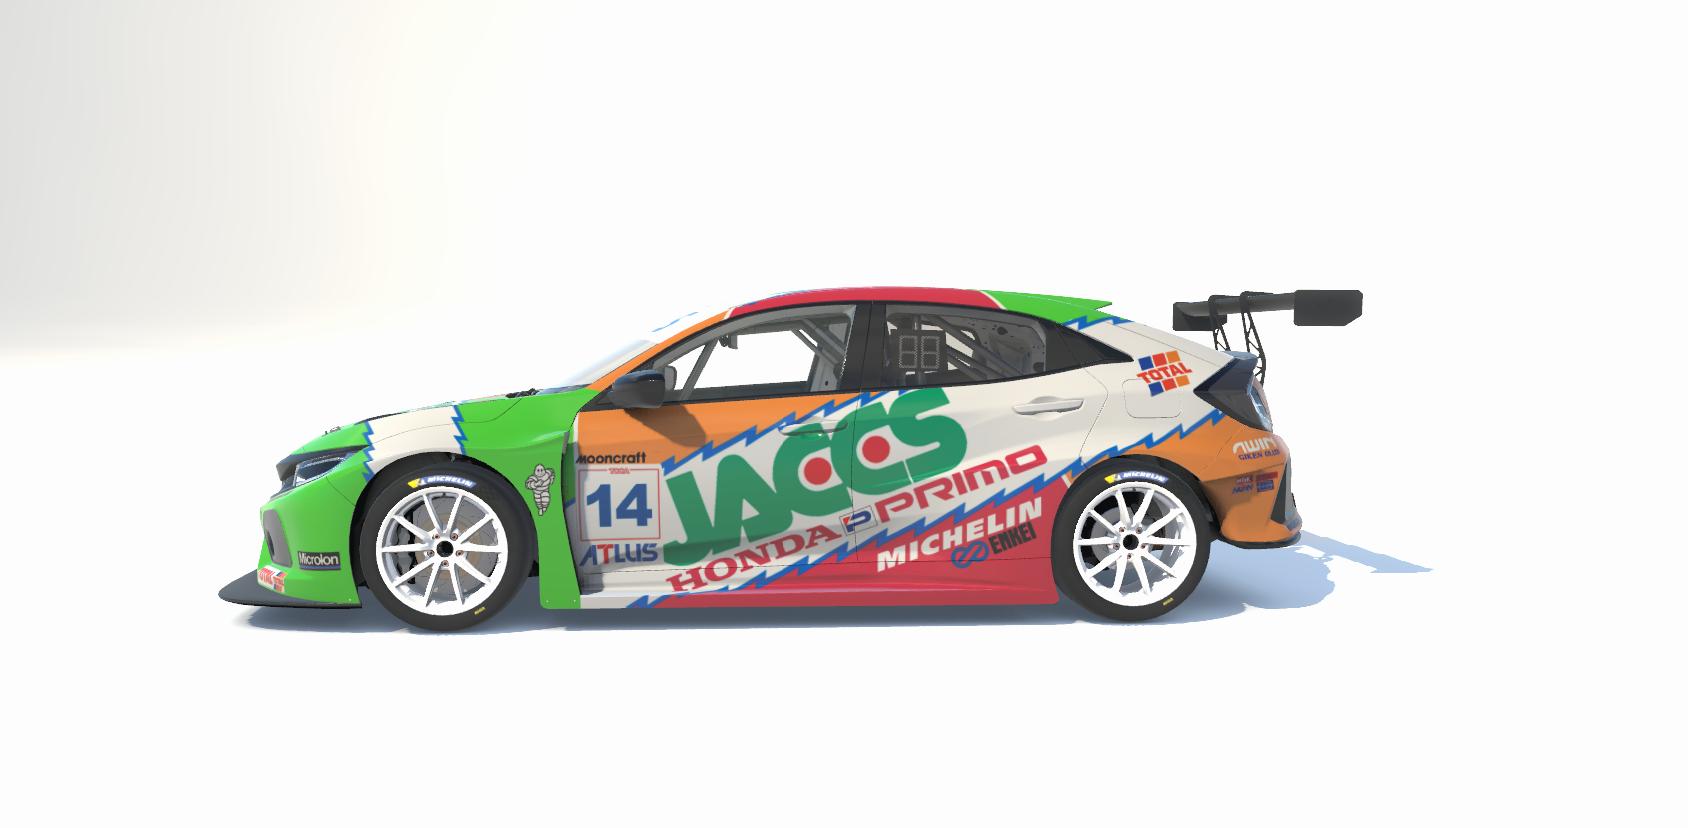 Preview of JTCC JACCS/Mooncraft Honda Civic 1996 by Andrew Fawcett